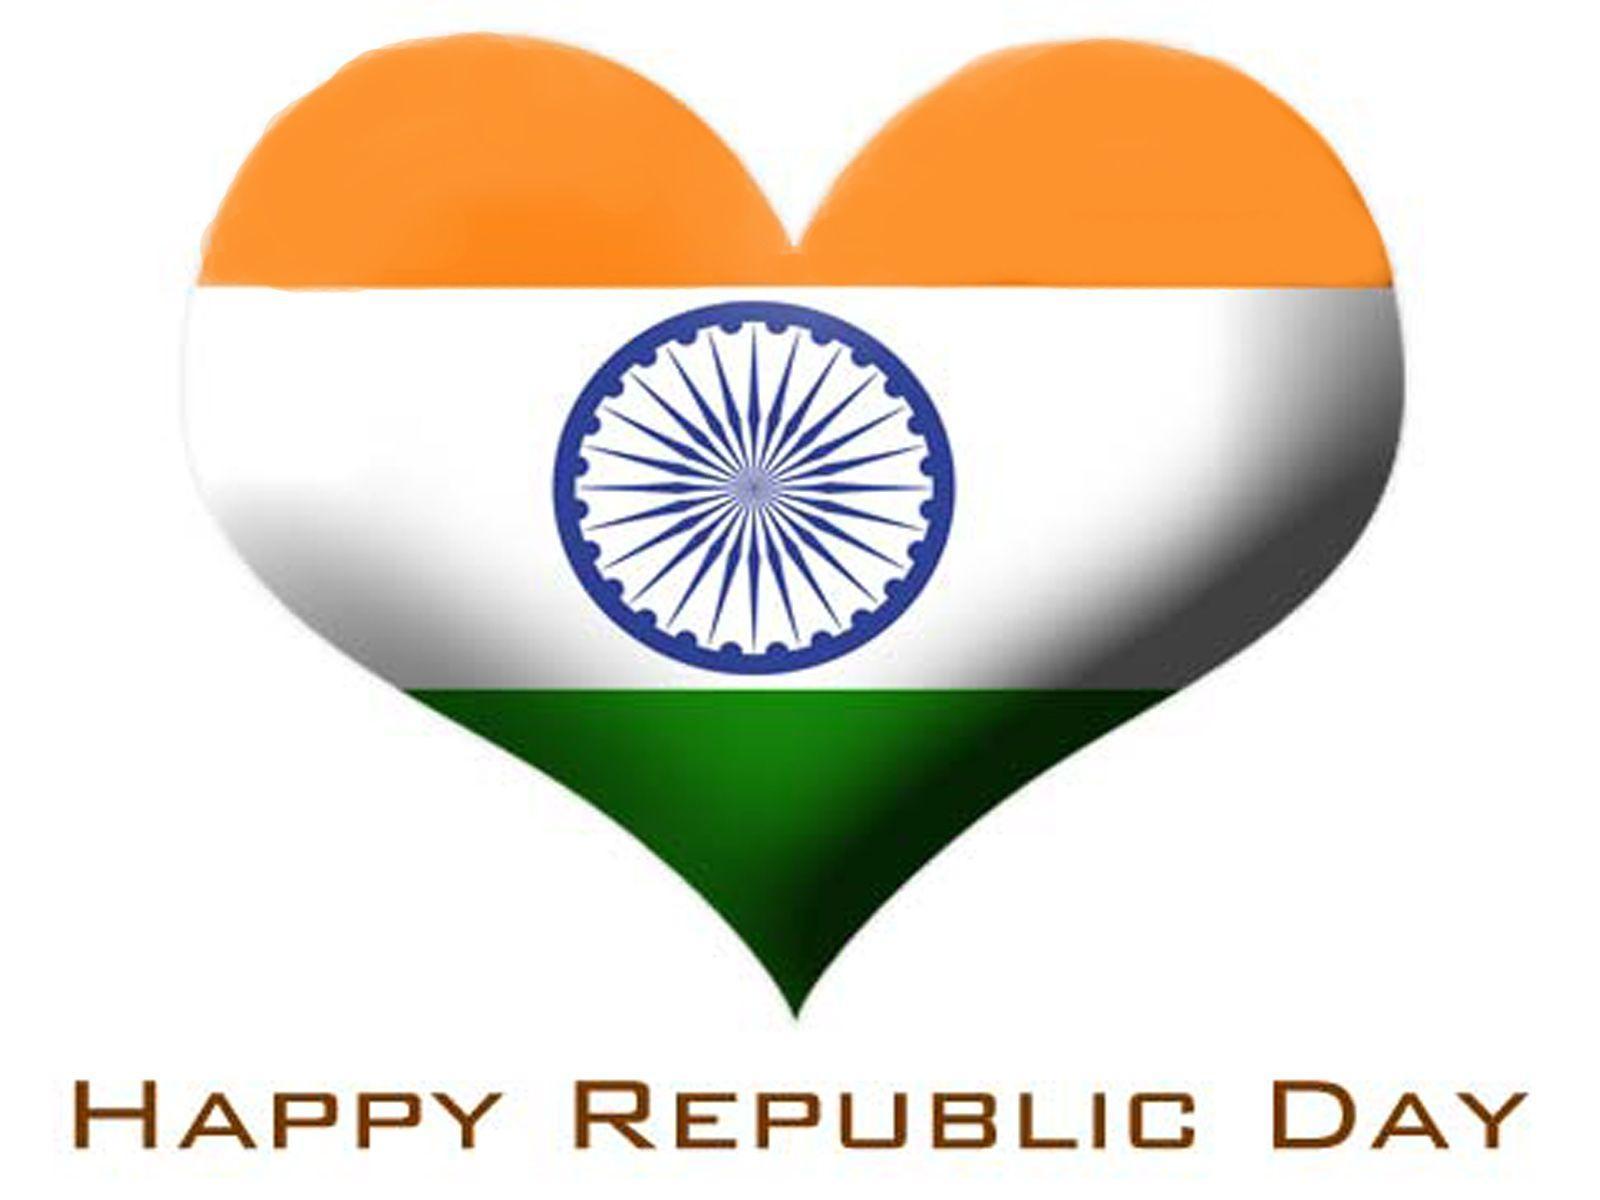 Republic day Indian Flag Image, Picture, Wallpaper for Facebook